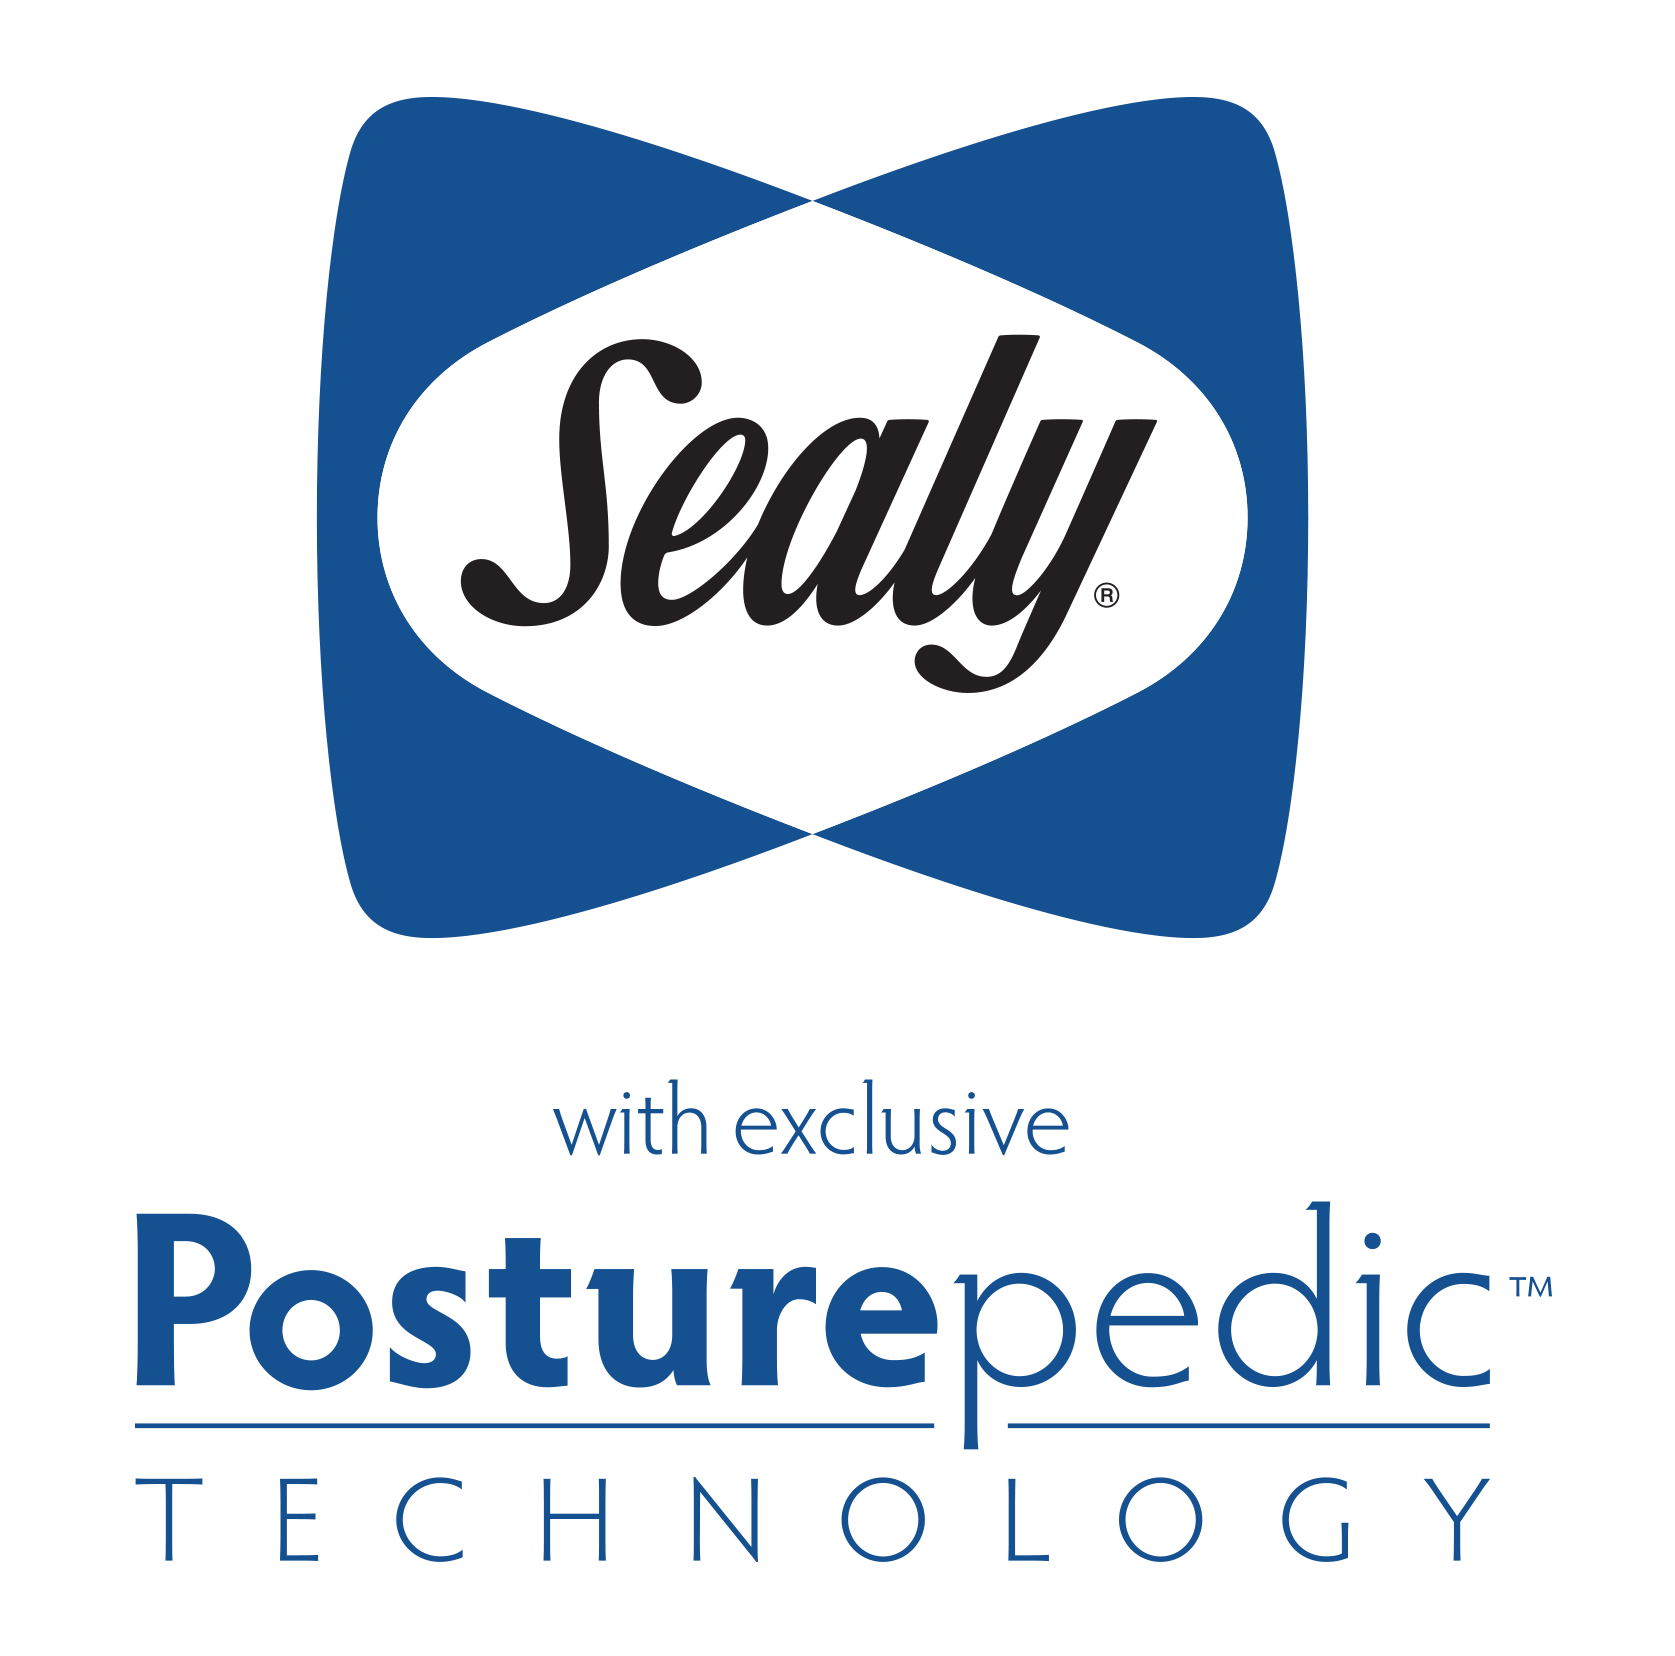 blue Sealy Posturepedic logo with the "with exclusive Posturepedic Technology" tagline